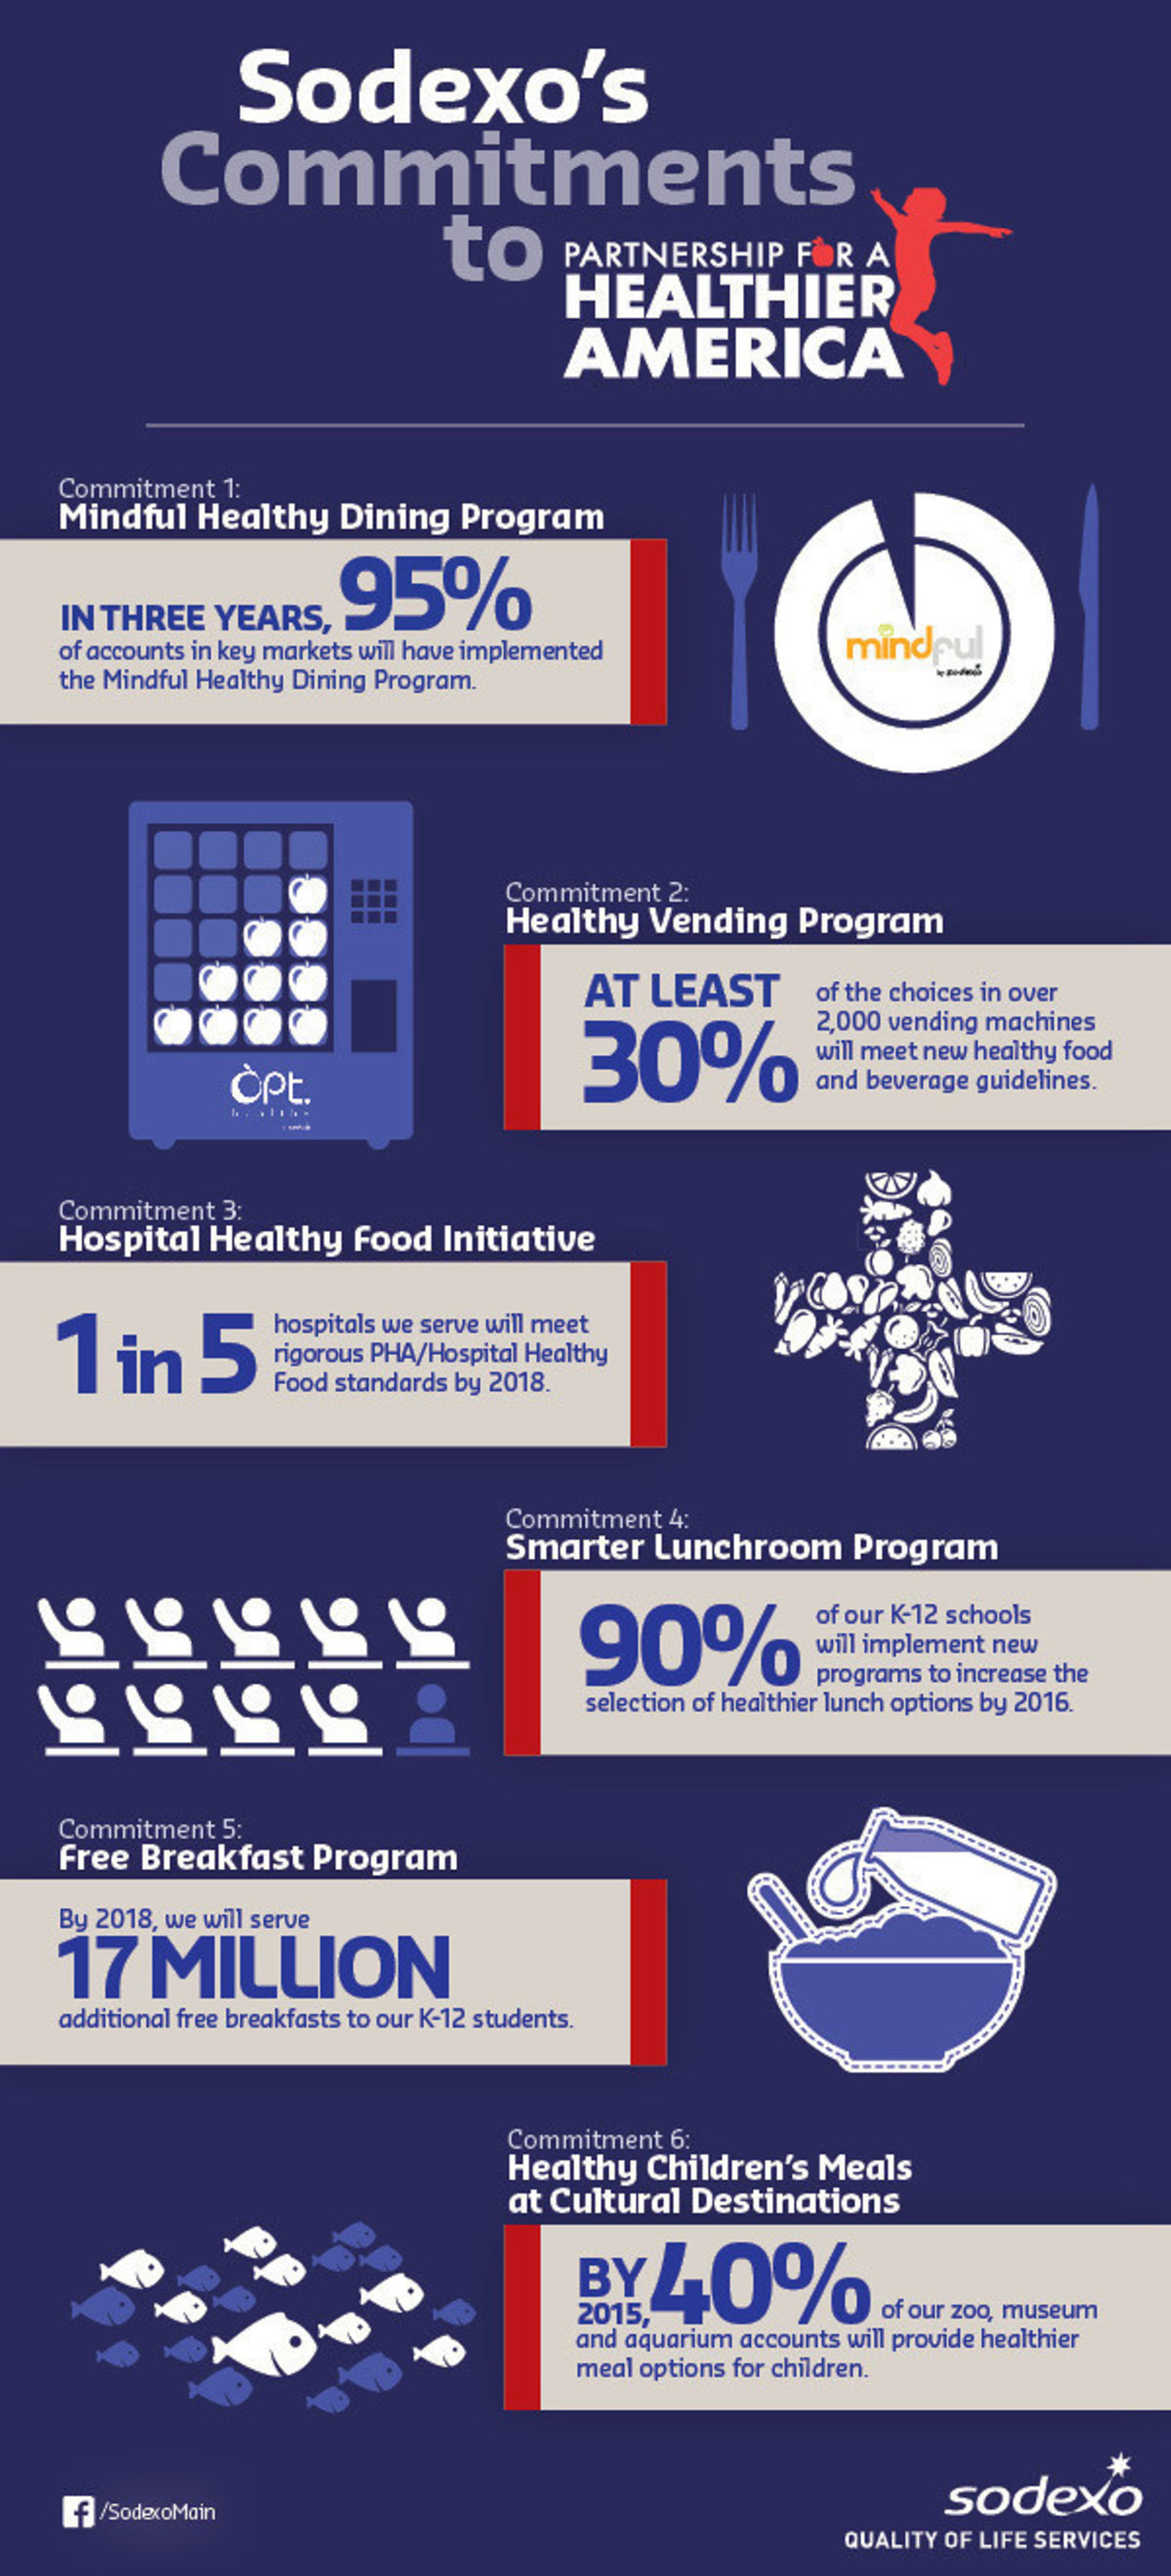 Sodexo's Commitments to the Partnership for a Healthier America